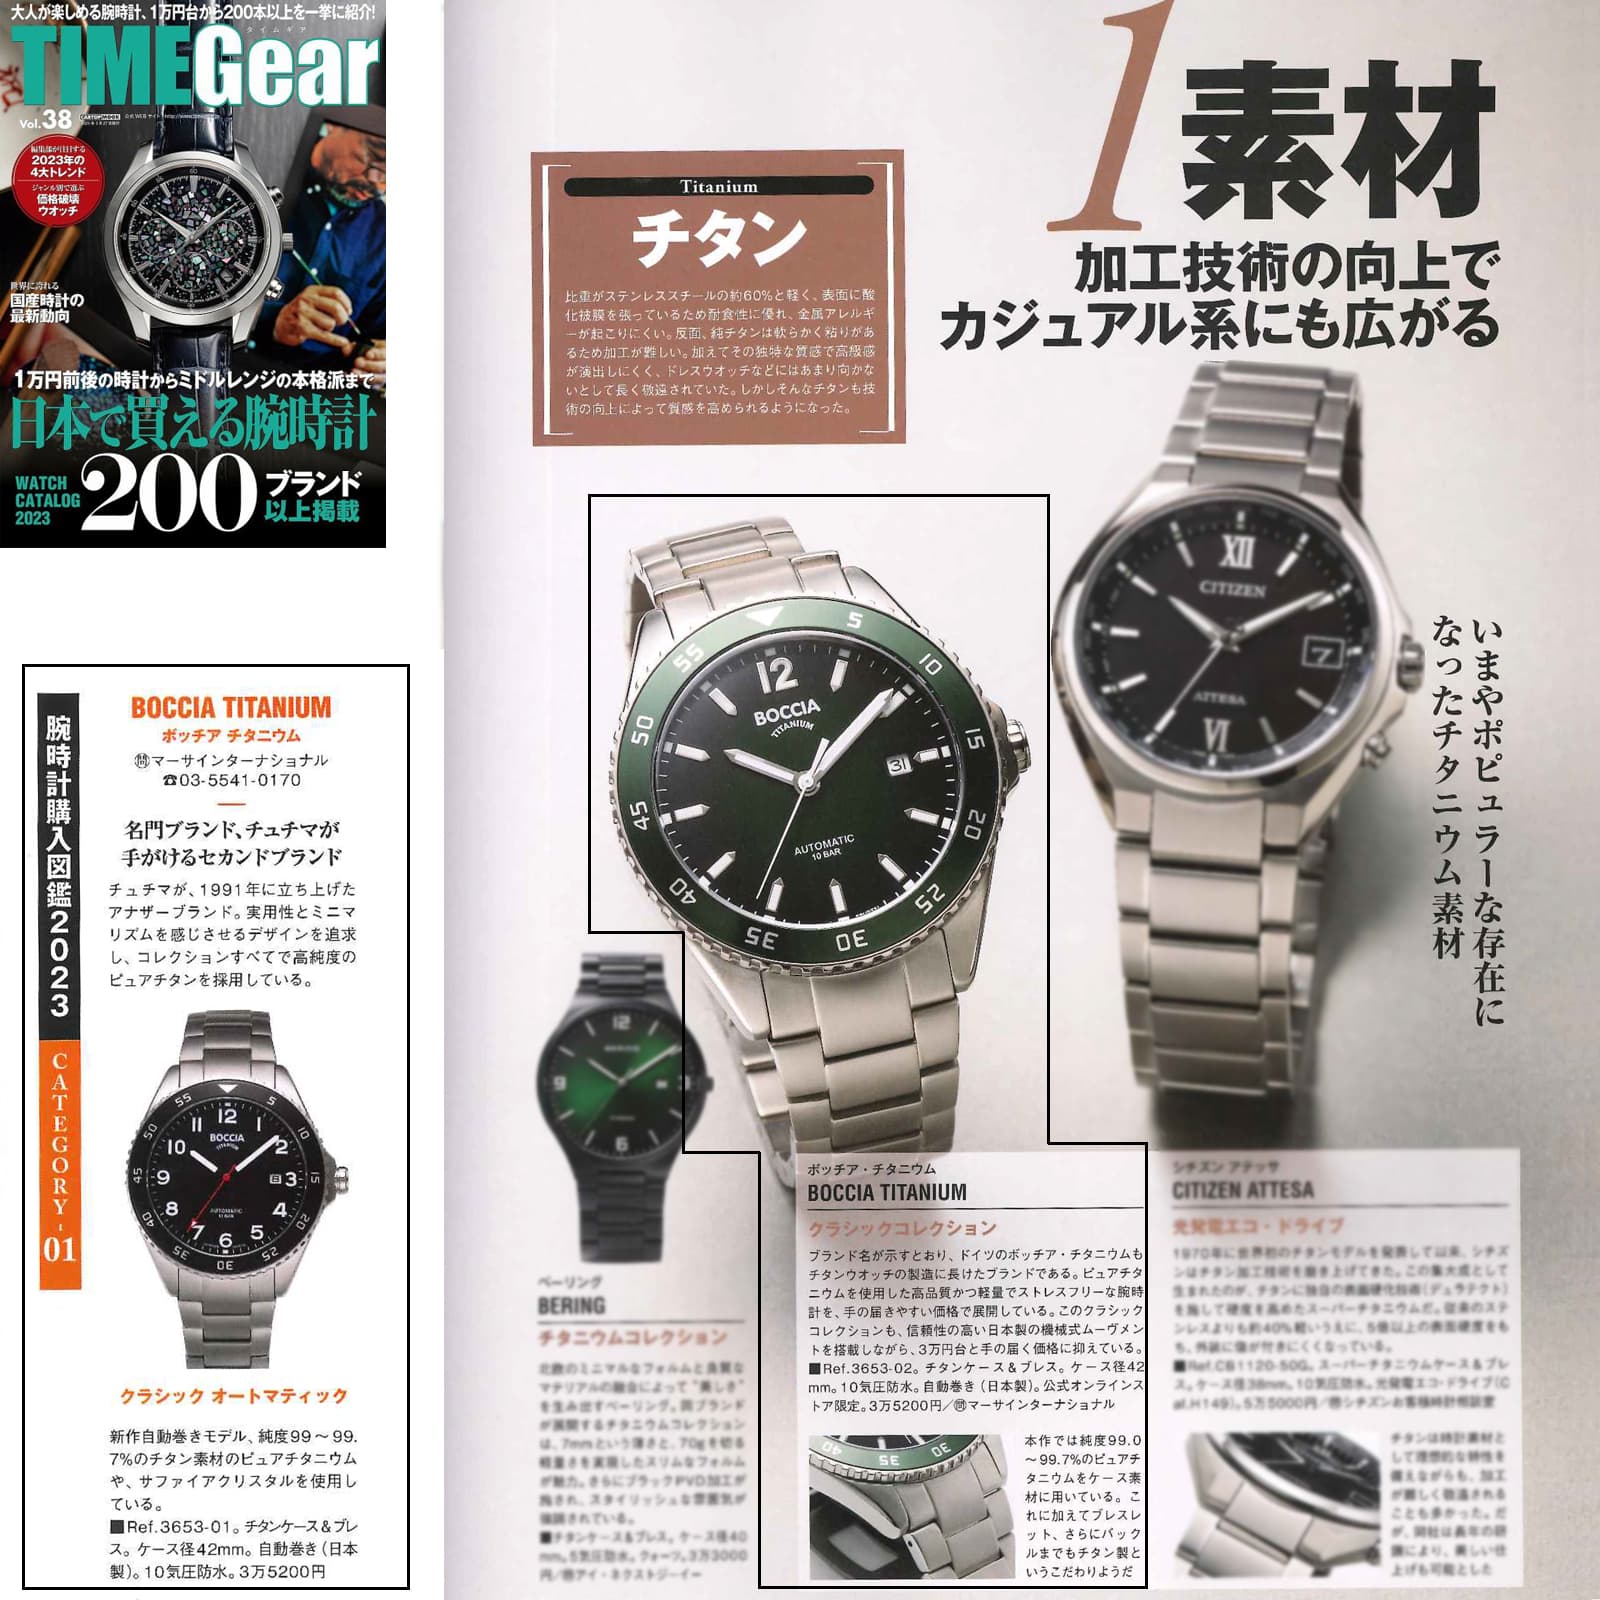 TIME Gear（タイムギア） Vol.38 P27、P102